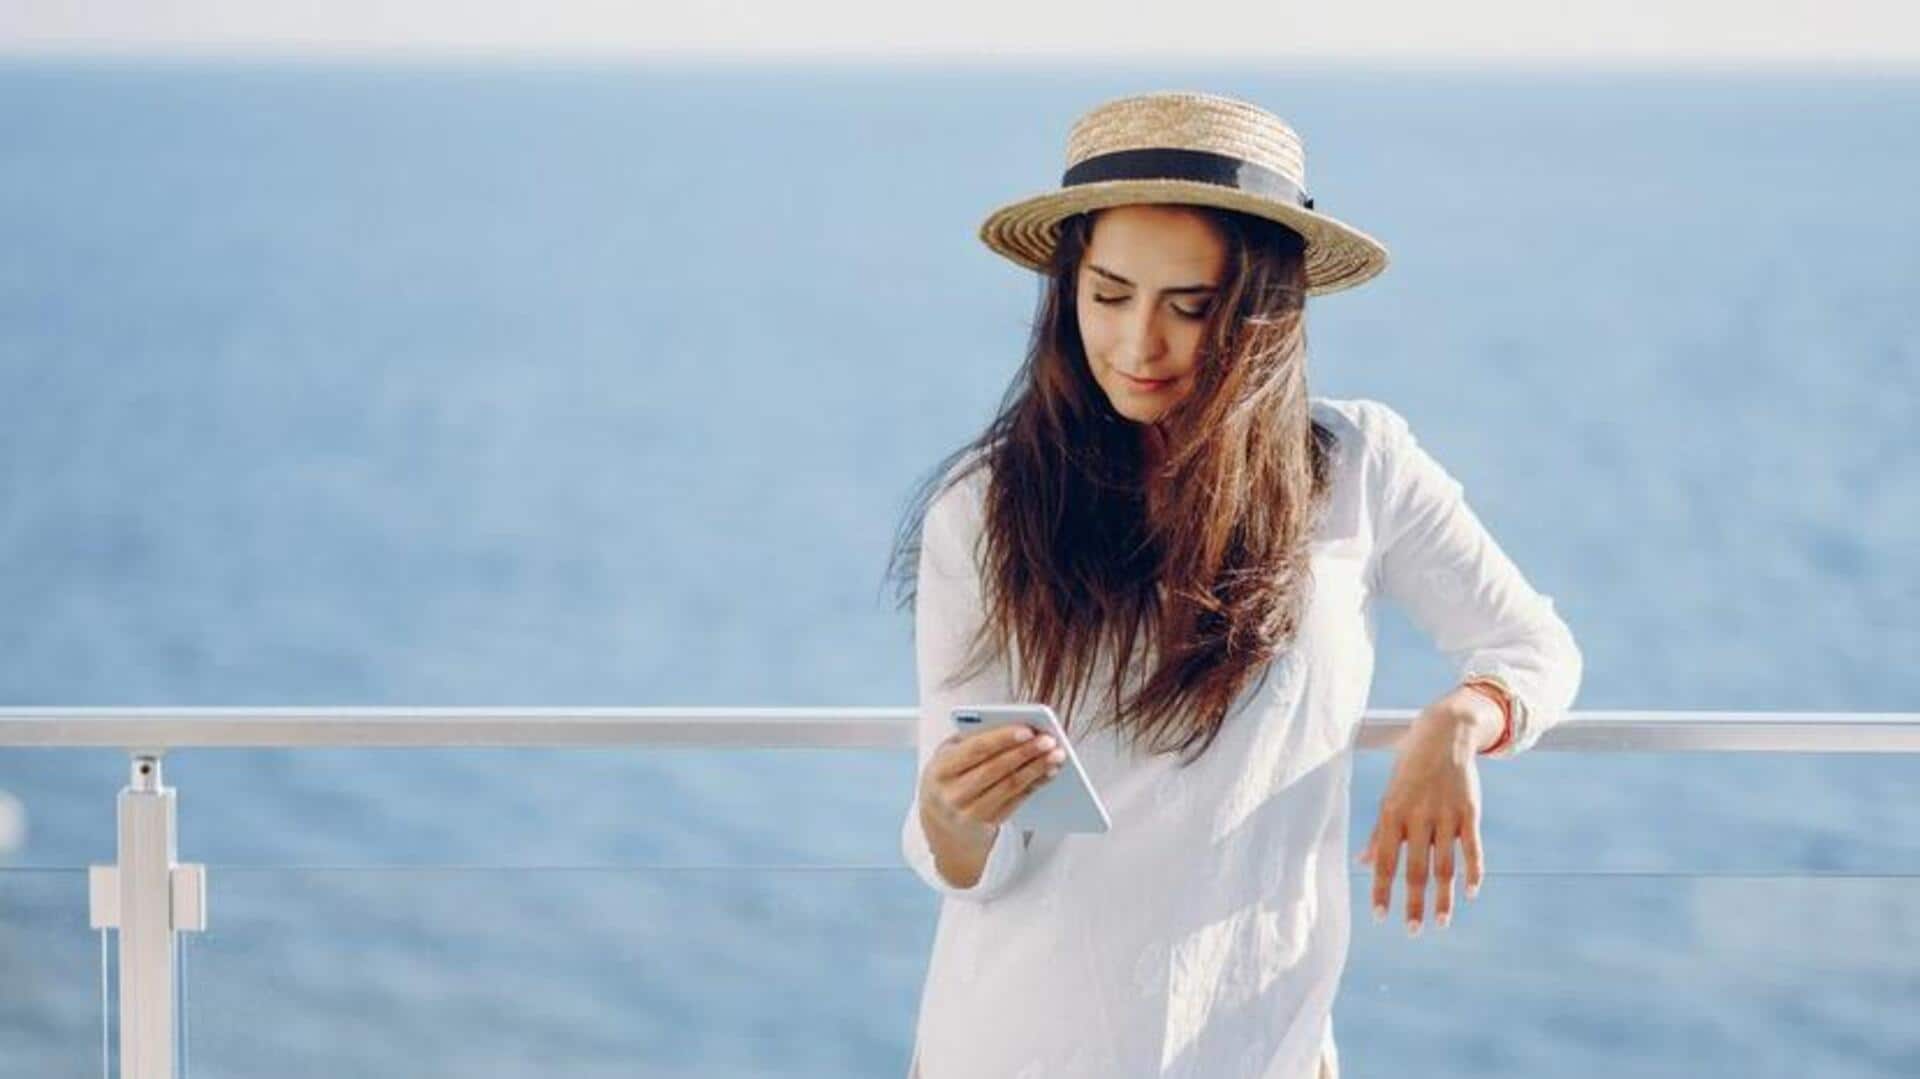 Nautical chic: A style guide to yacht party fashion